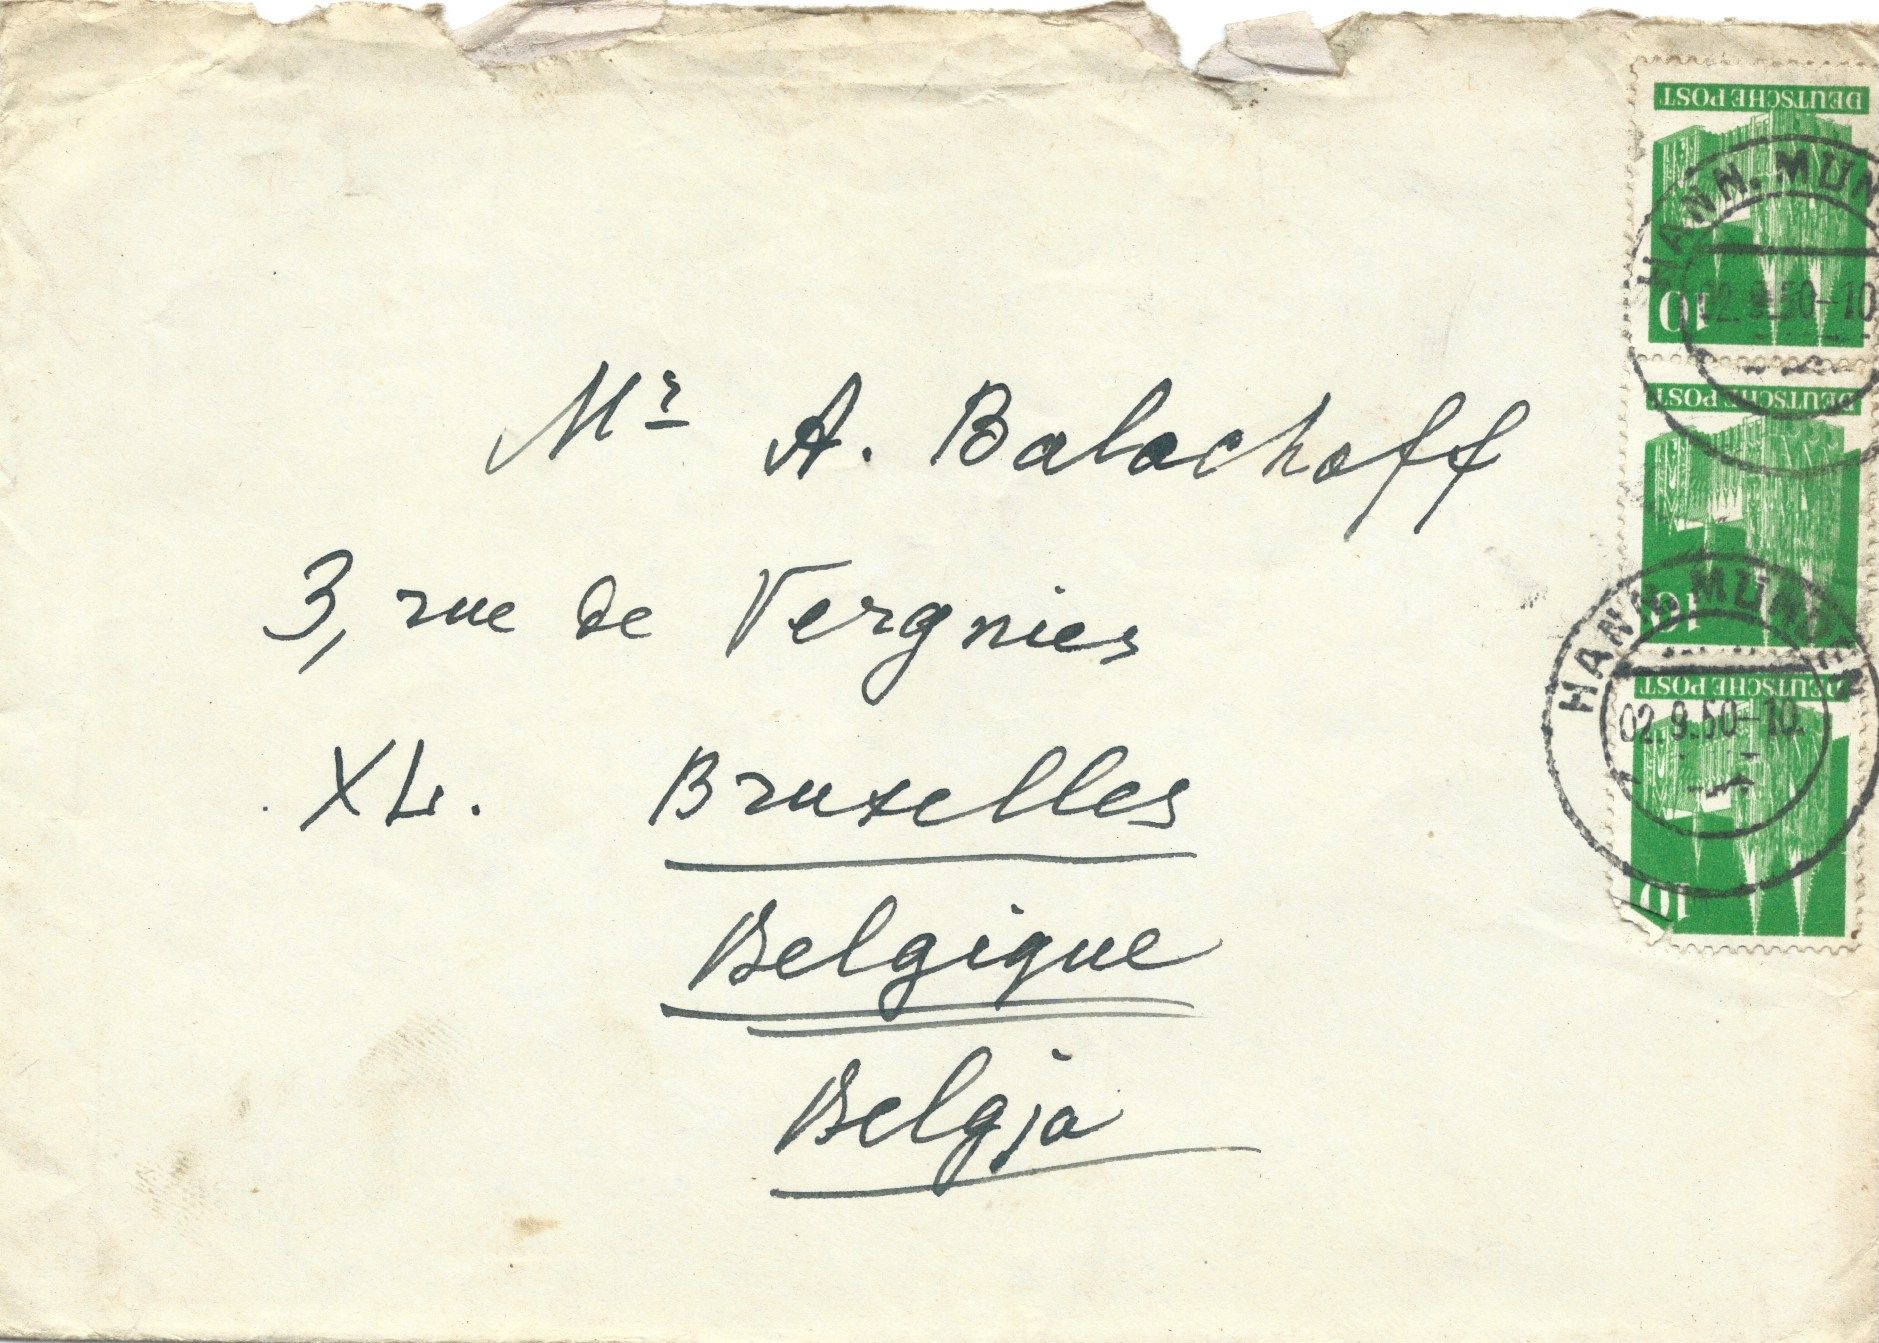 Null ARCHIVE of Andrei BALASHOV (1899-1969)

Archive of letters and poems of Vla&hellip;